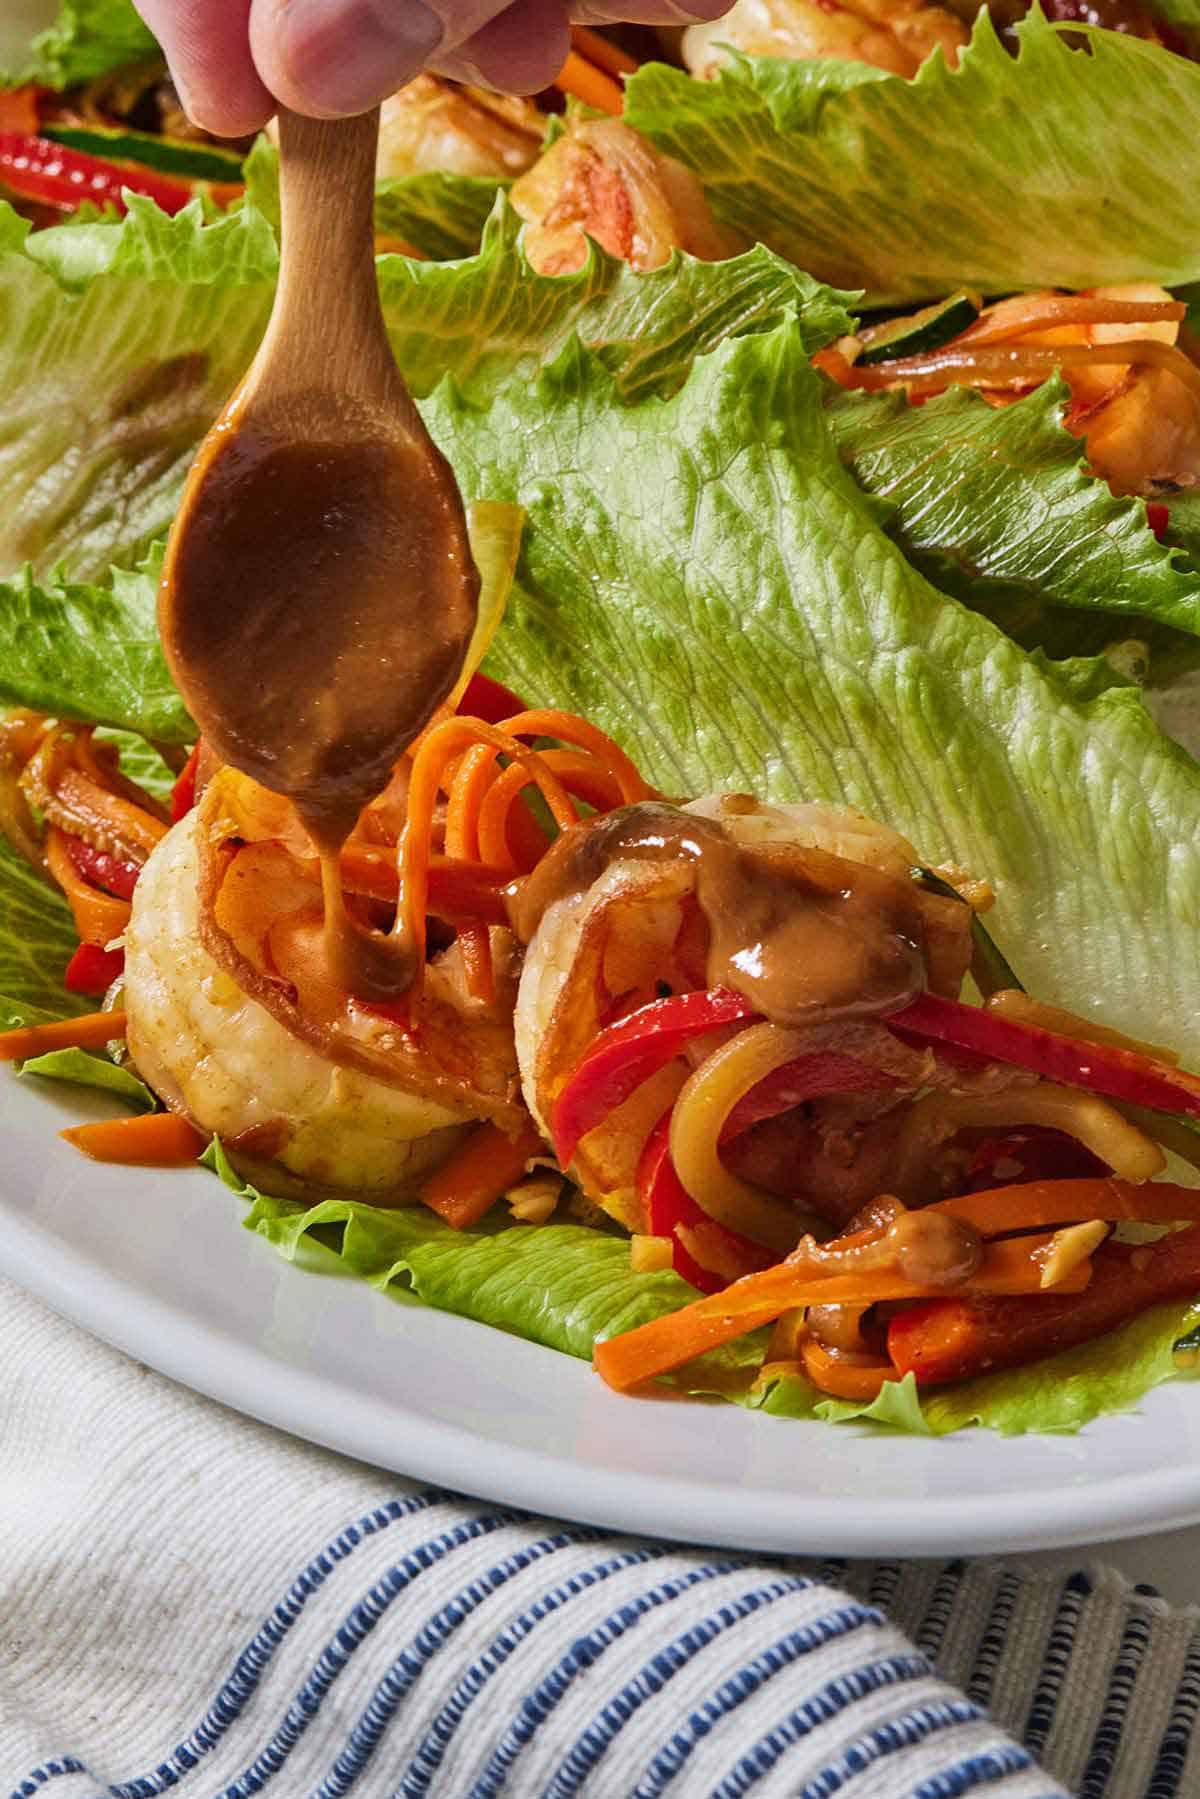 A small spoon drizzling peanut sauce over a shrimp lettuce wrap.